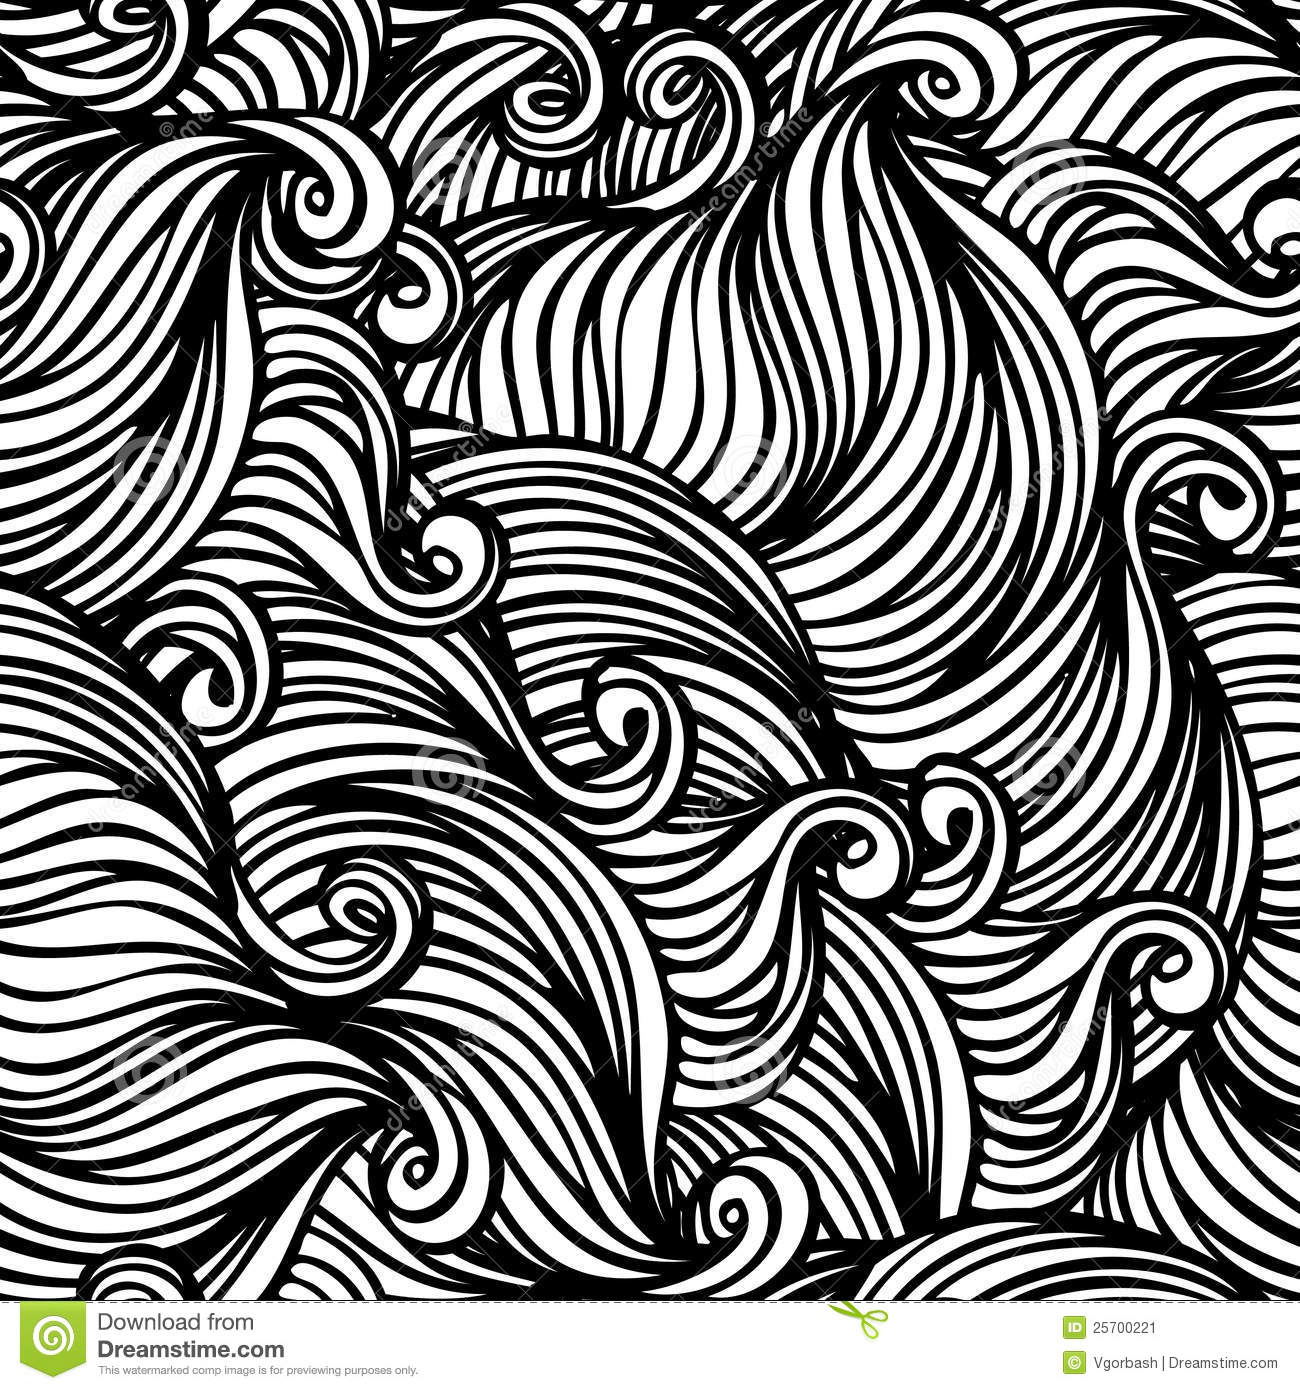 Black and White Abstract Patterns